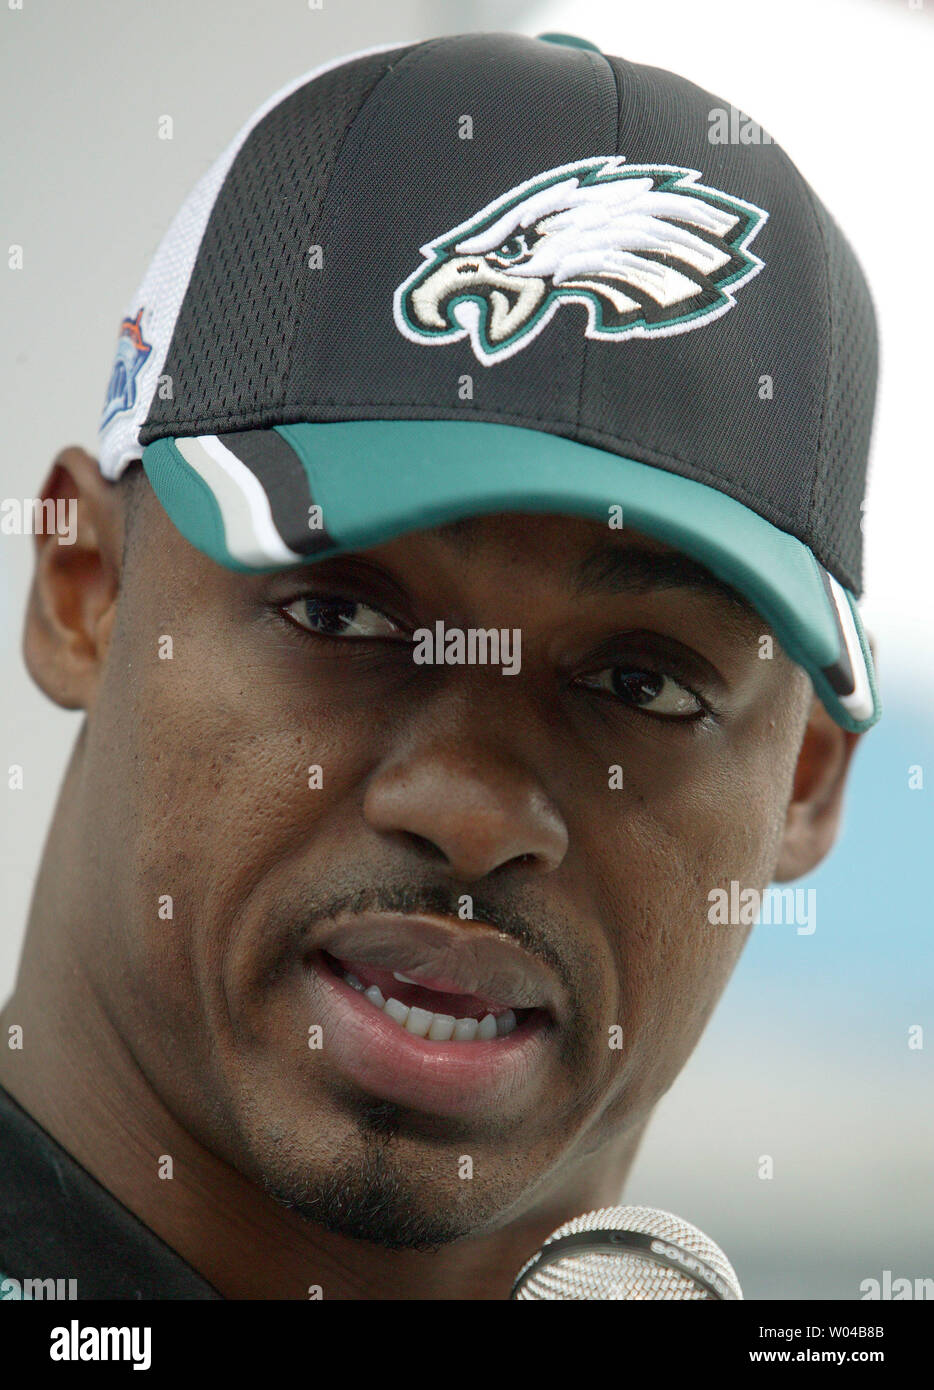 The Philadelphia Eagles' Brian Dawkins speaks to the press during Media Day for Super Bowl XXXIX on Feb. 1, 2005, in Jacksonville, Fla. The Eagles will play the New England Patriots for the championship on Sunday, Feb. 6.  (UPI Photo/Terry Schmitt) Stock Photo